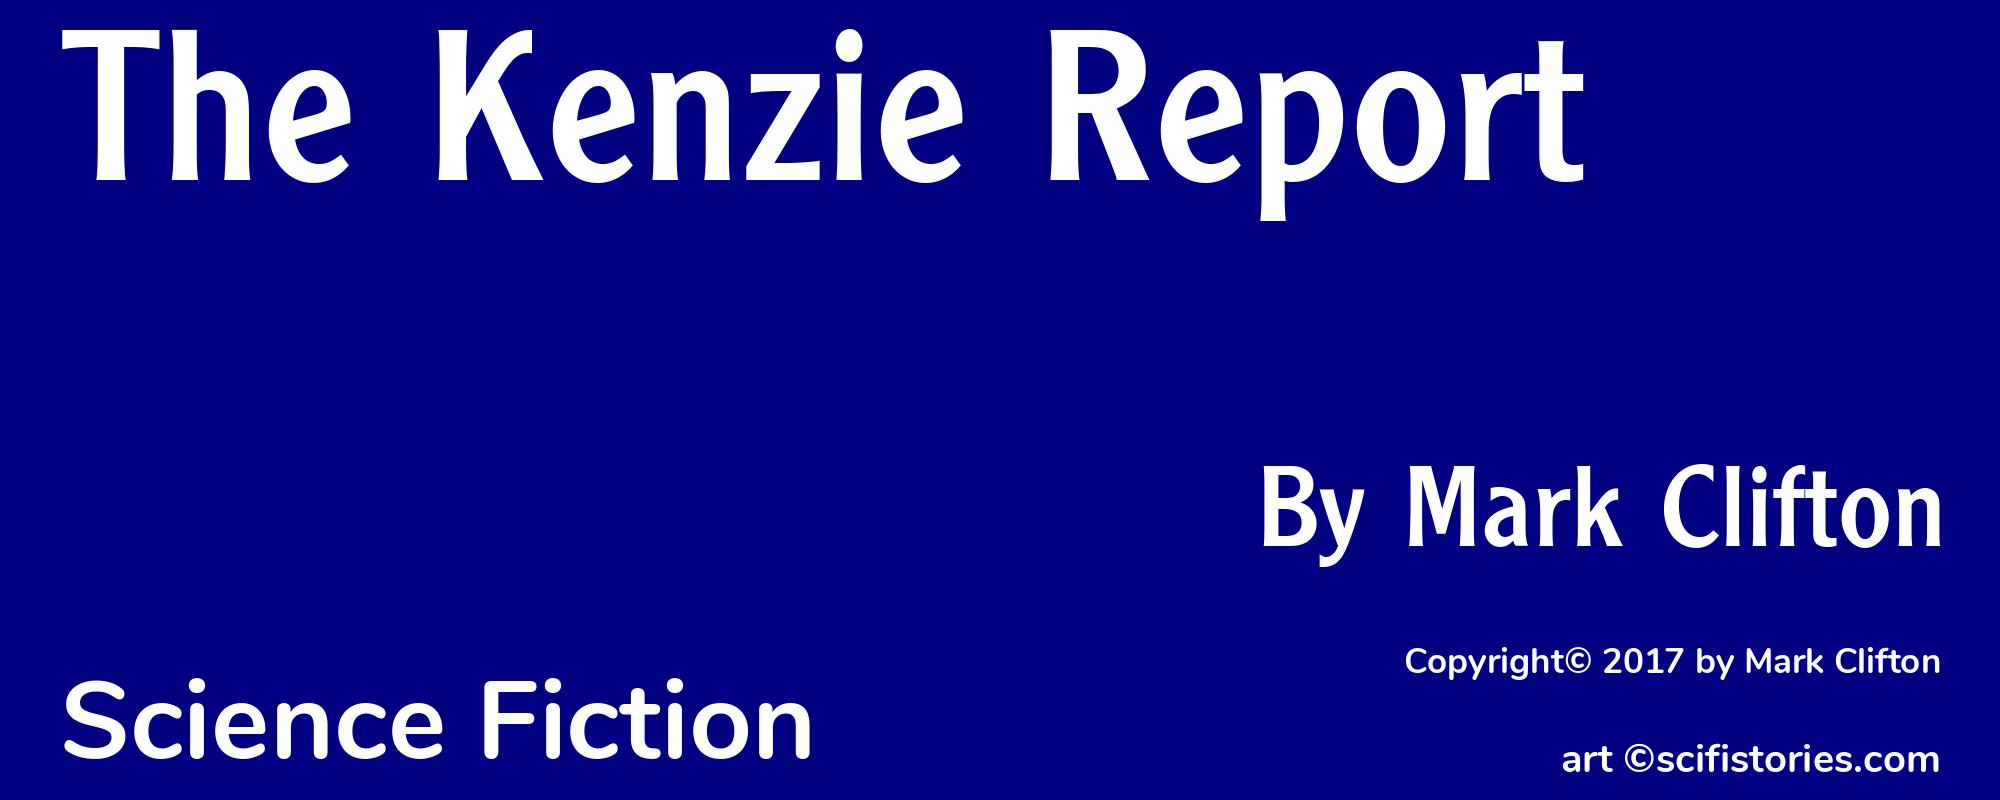 The Kenzie Report - Cover